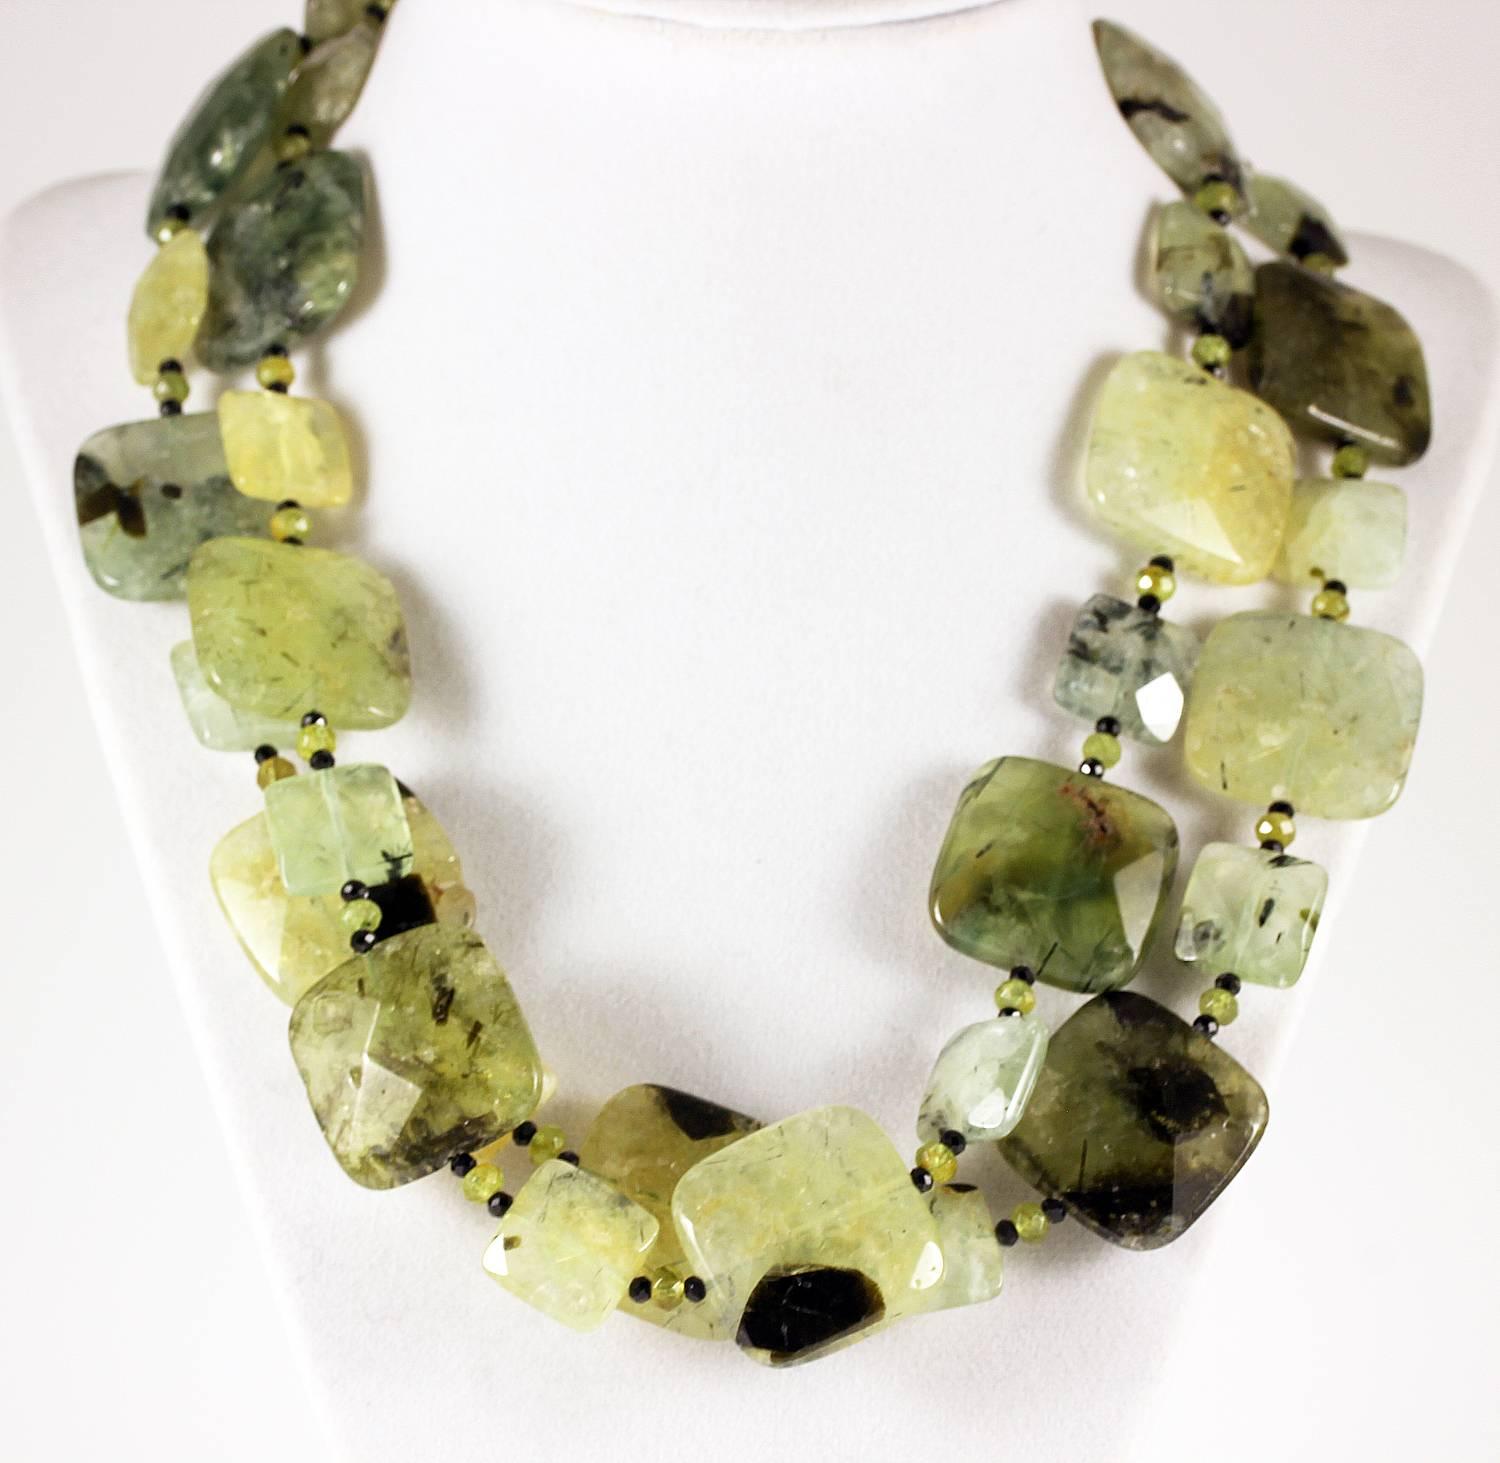 Double strand of translucent glowing natural chunks of checkerboard gem cut Prehnite enhanced with little sparkling Peridot gems and sparkling black Spinel.
Size:  large Prehnite approximately 25 mm x 25 mm
Length:  19 inches
Clasp:  gold plated